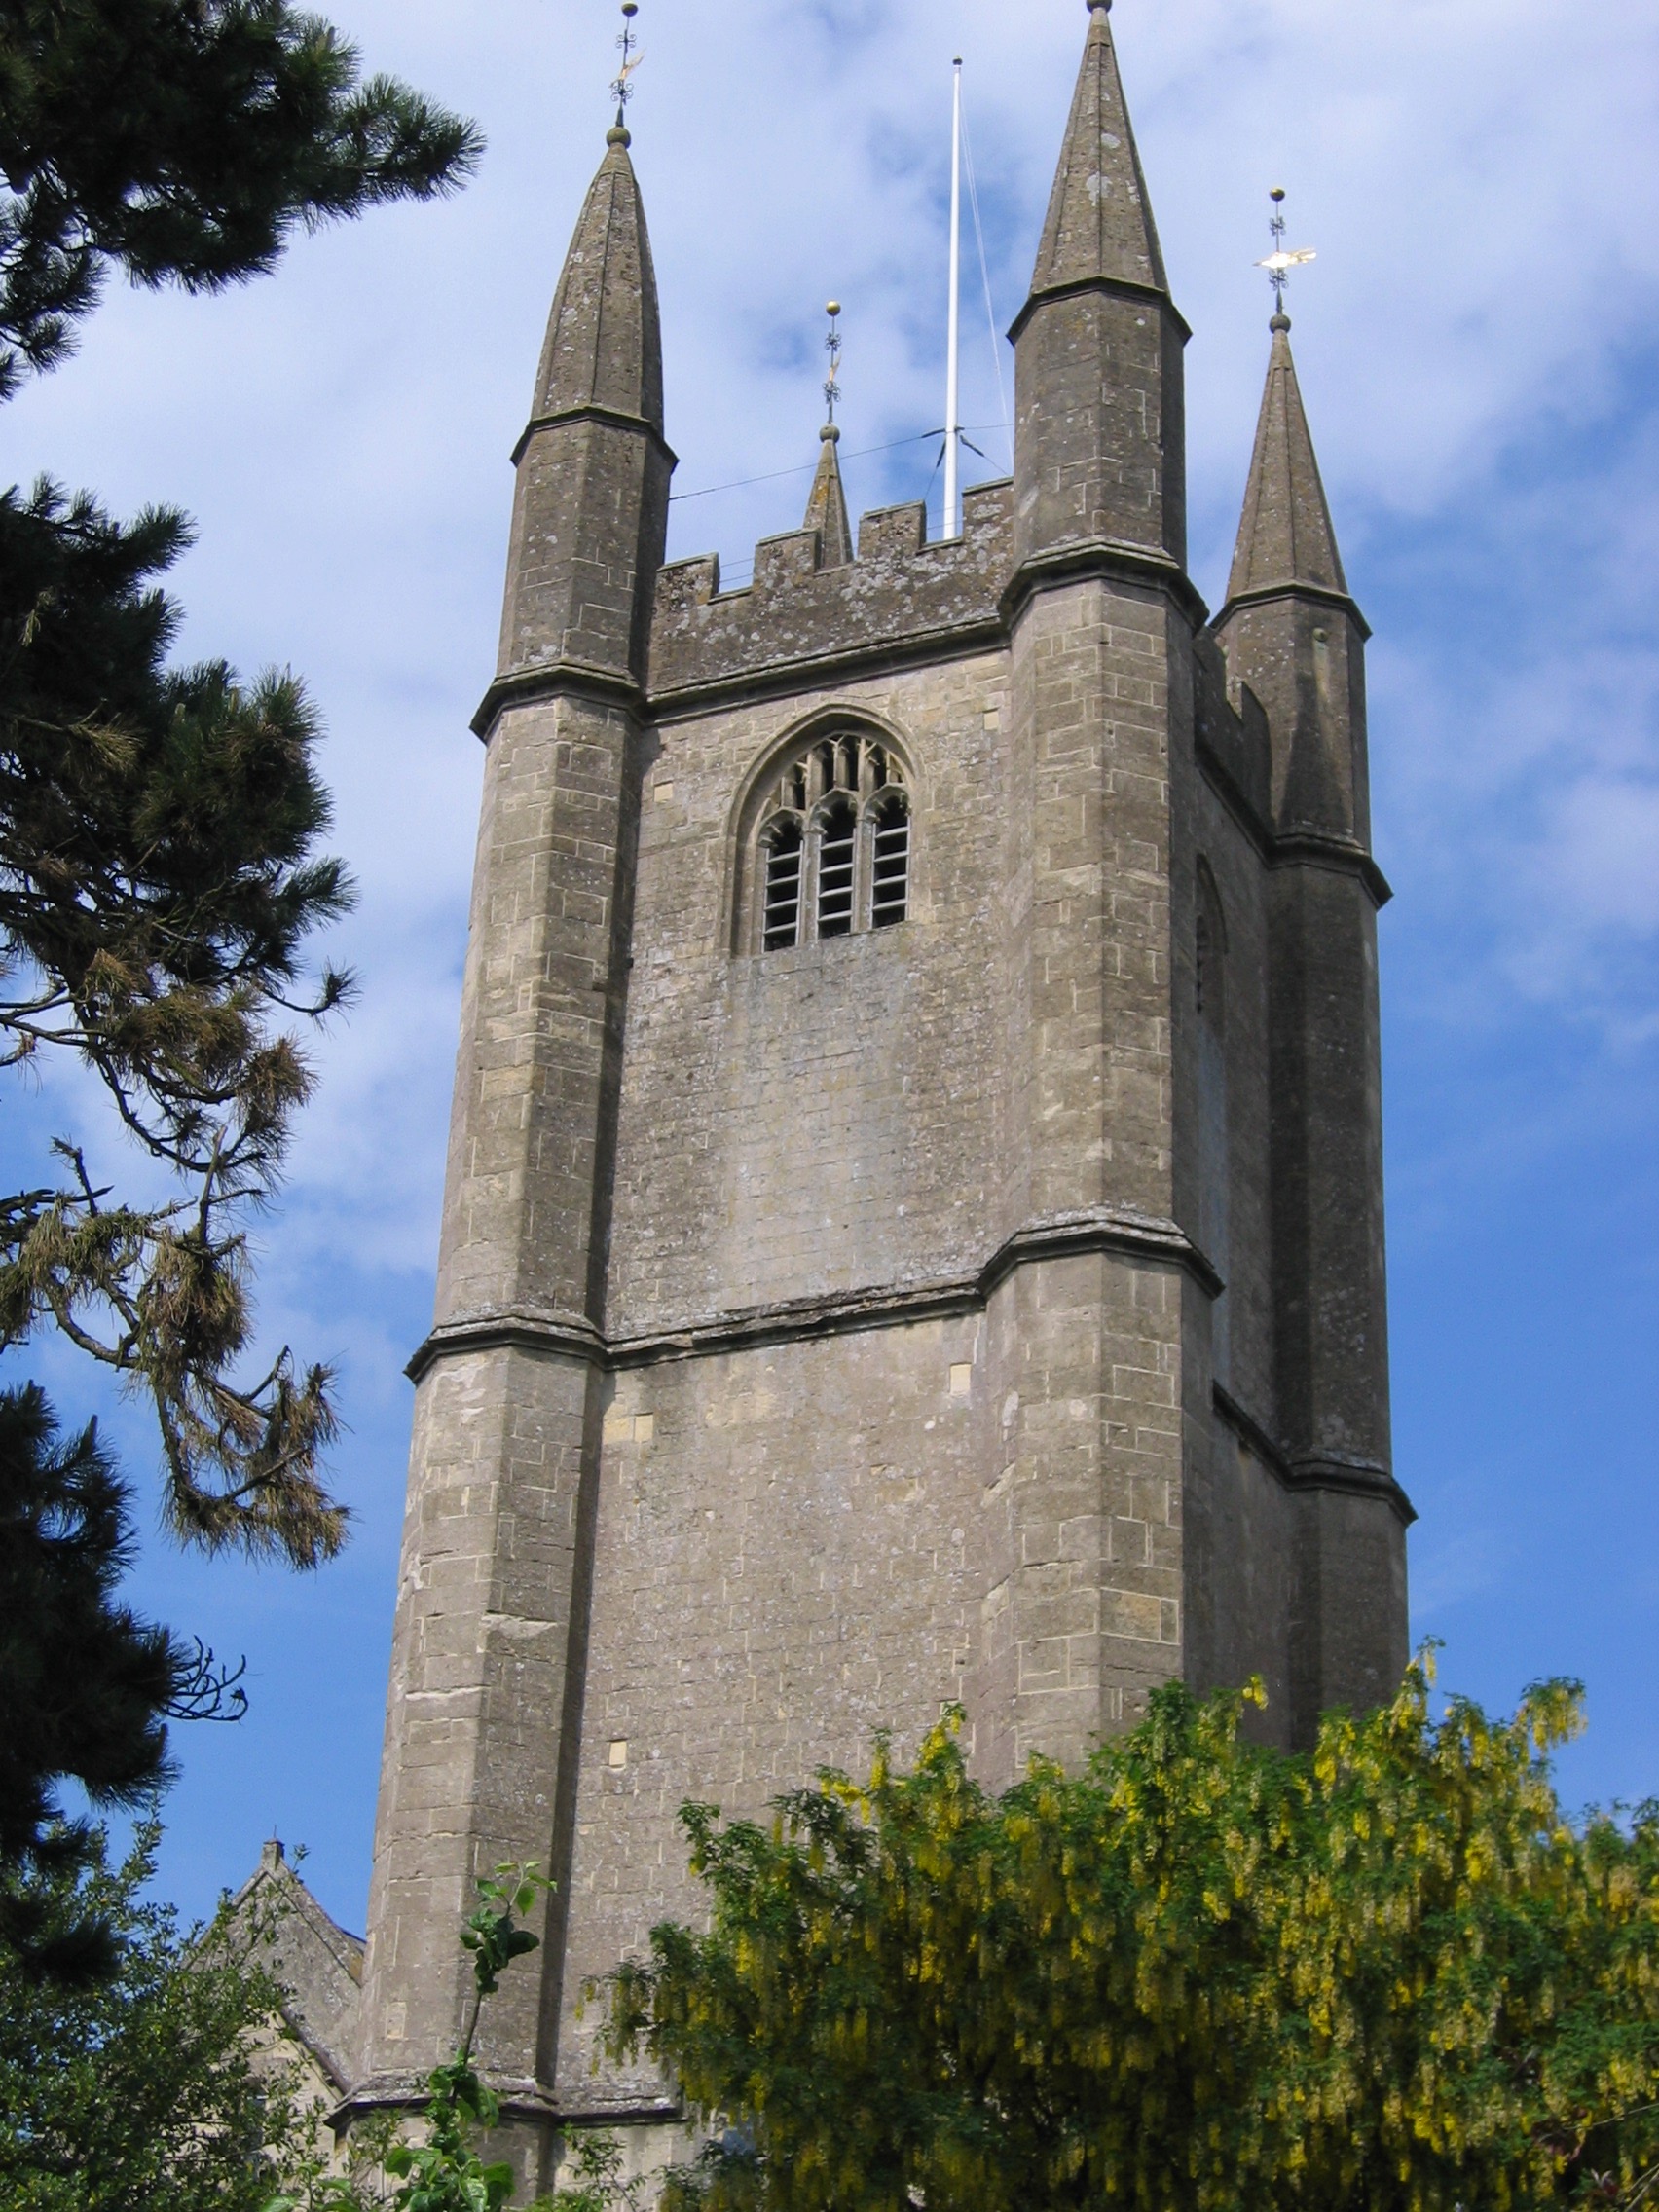  St Peter’s Tower